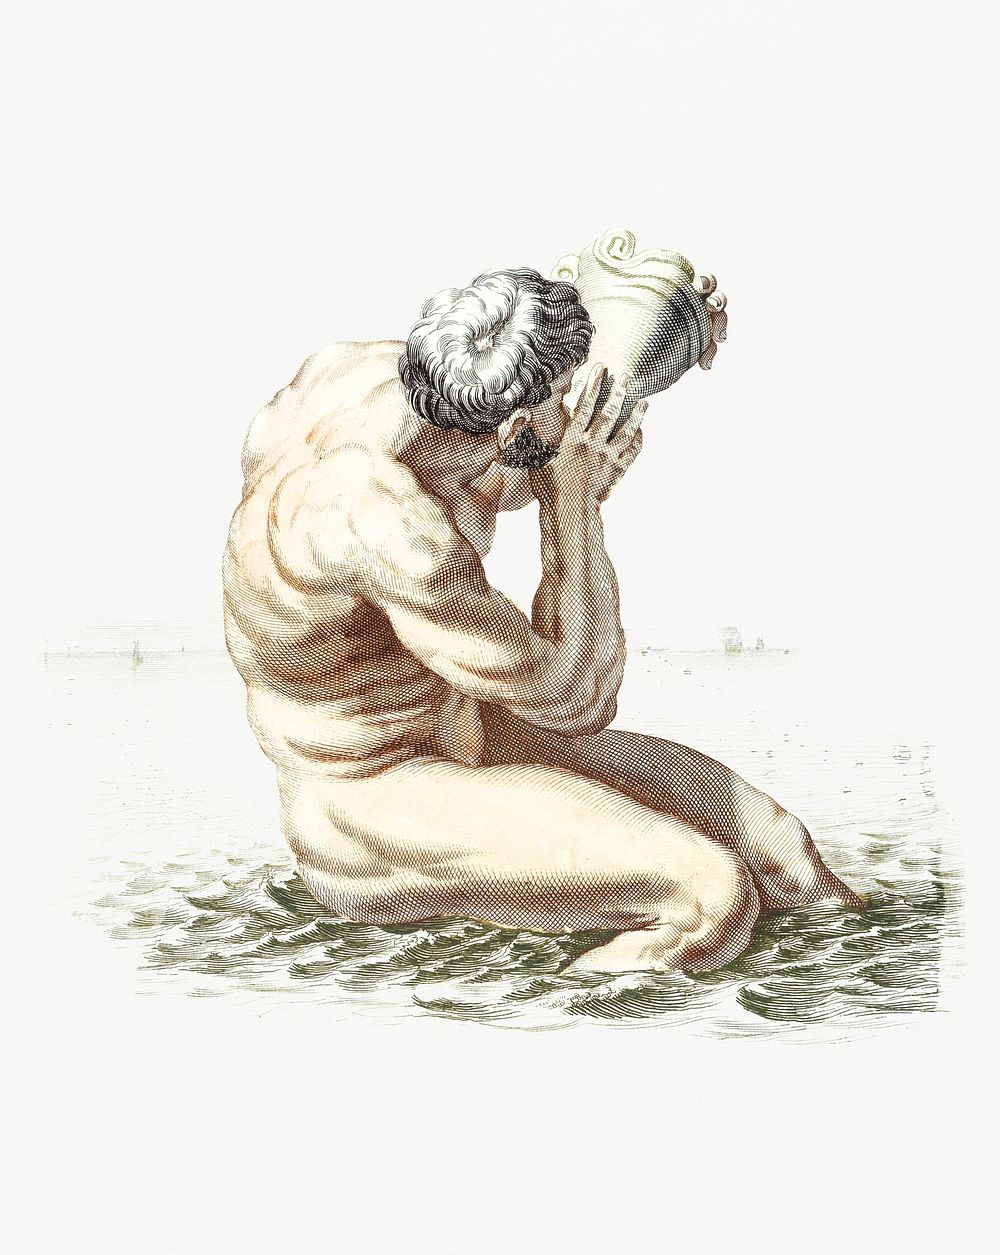 Triton blows on the conch shell by Johan Teyler (1648-1709). Original from Rijks Museum. Digitally enhanced by rawpixel.